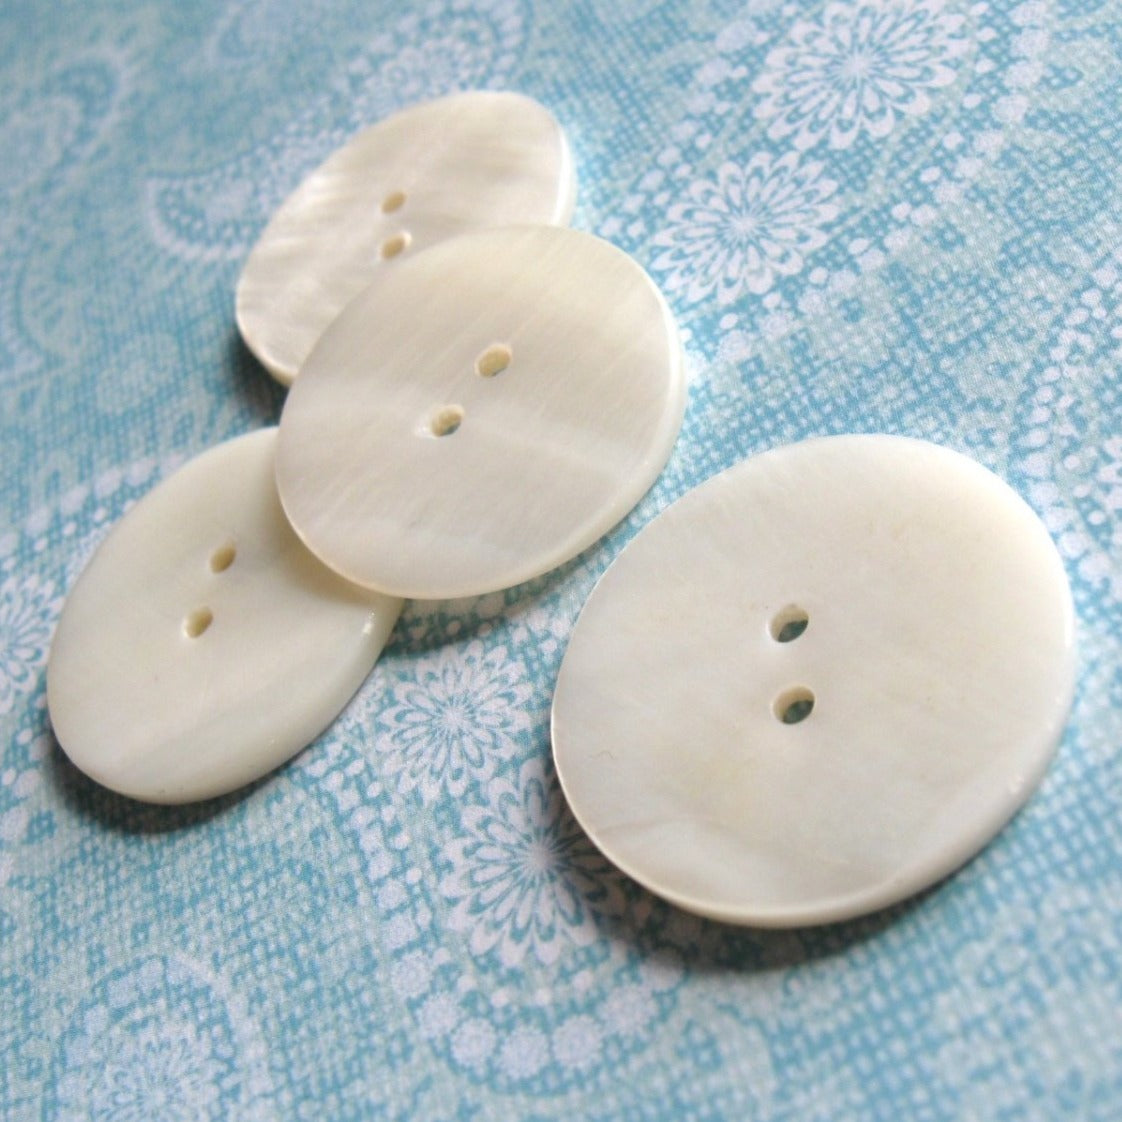 Iridescent Buttons White Pearly Finish 20mm a Set of 6 -  Canada